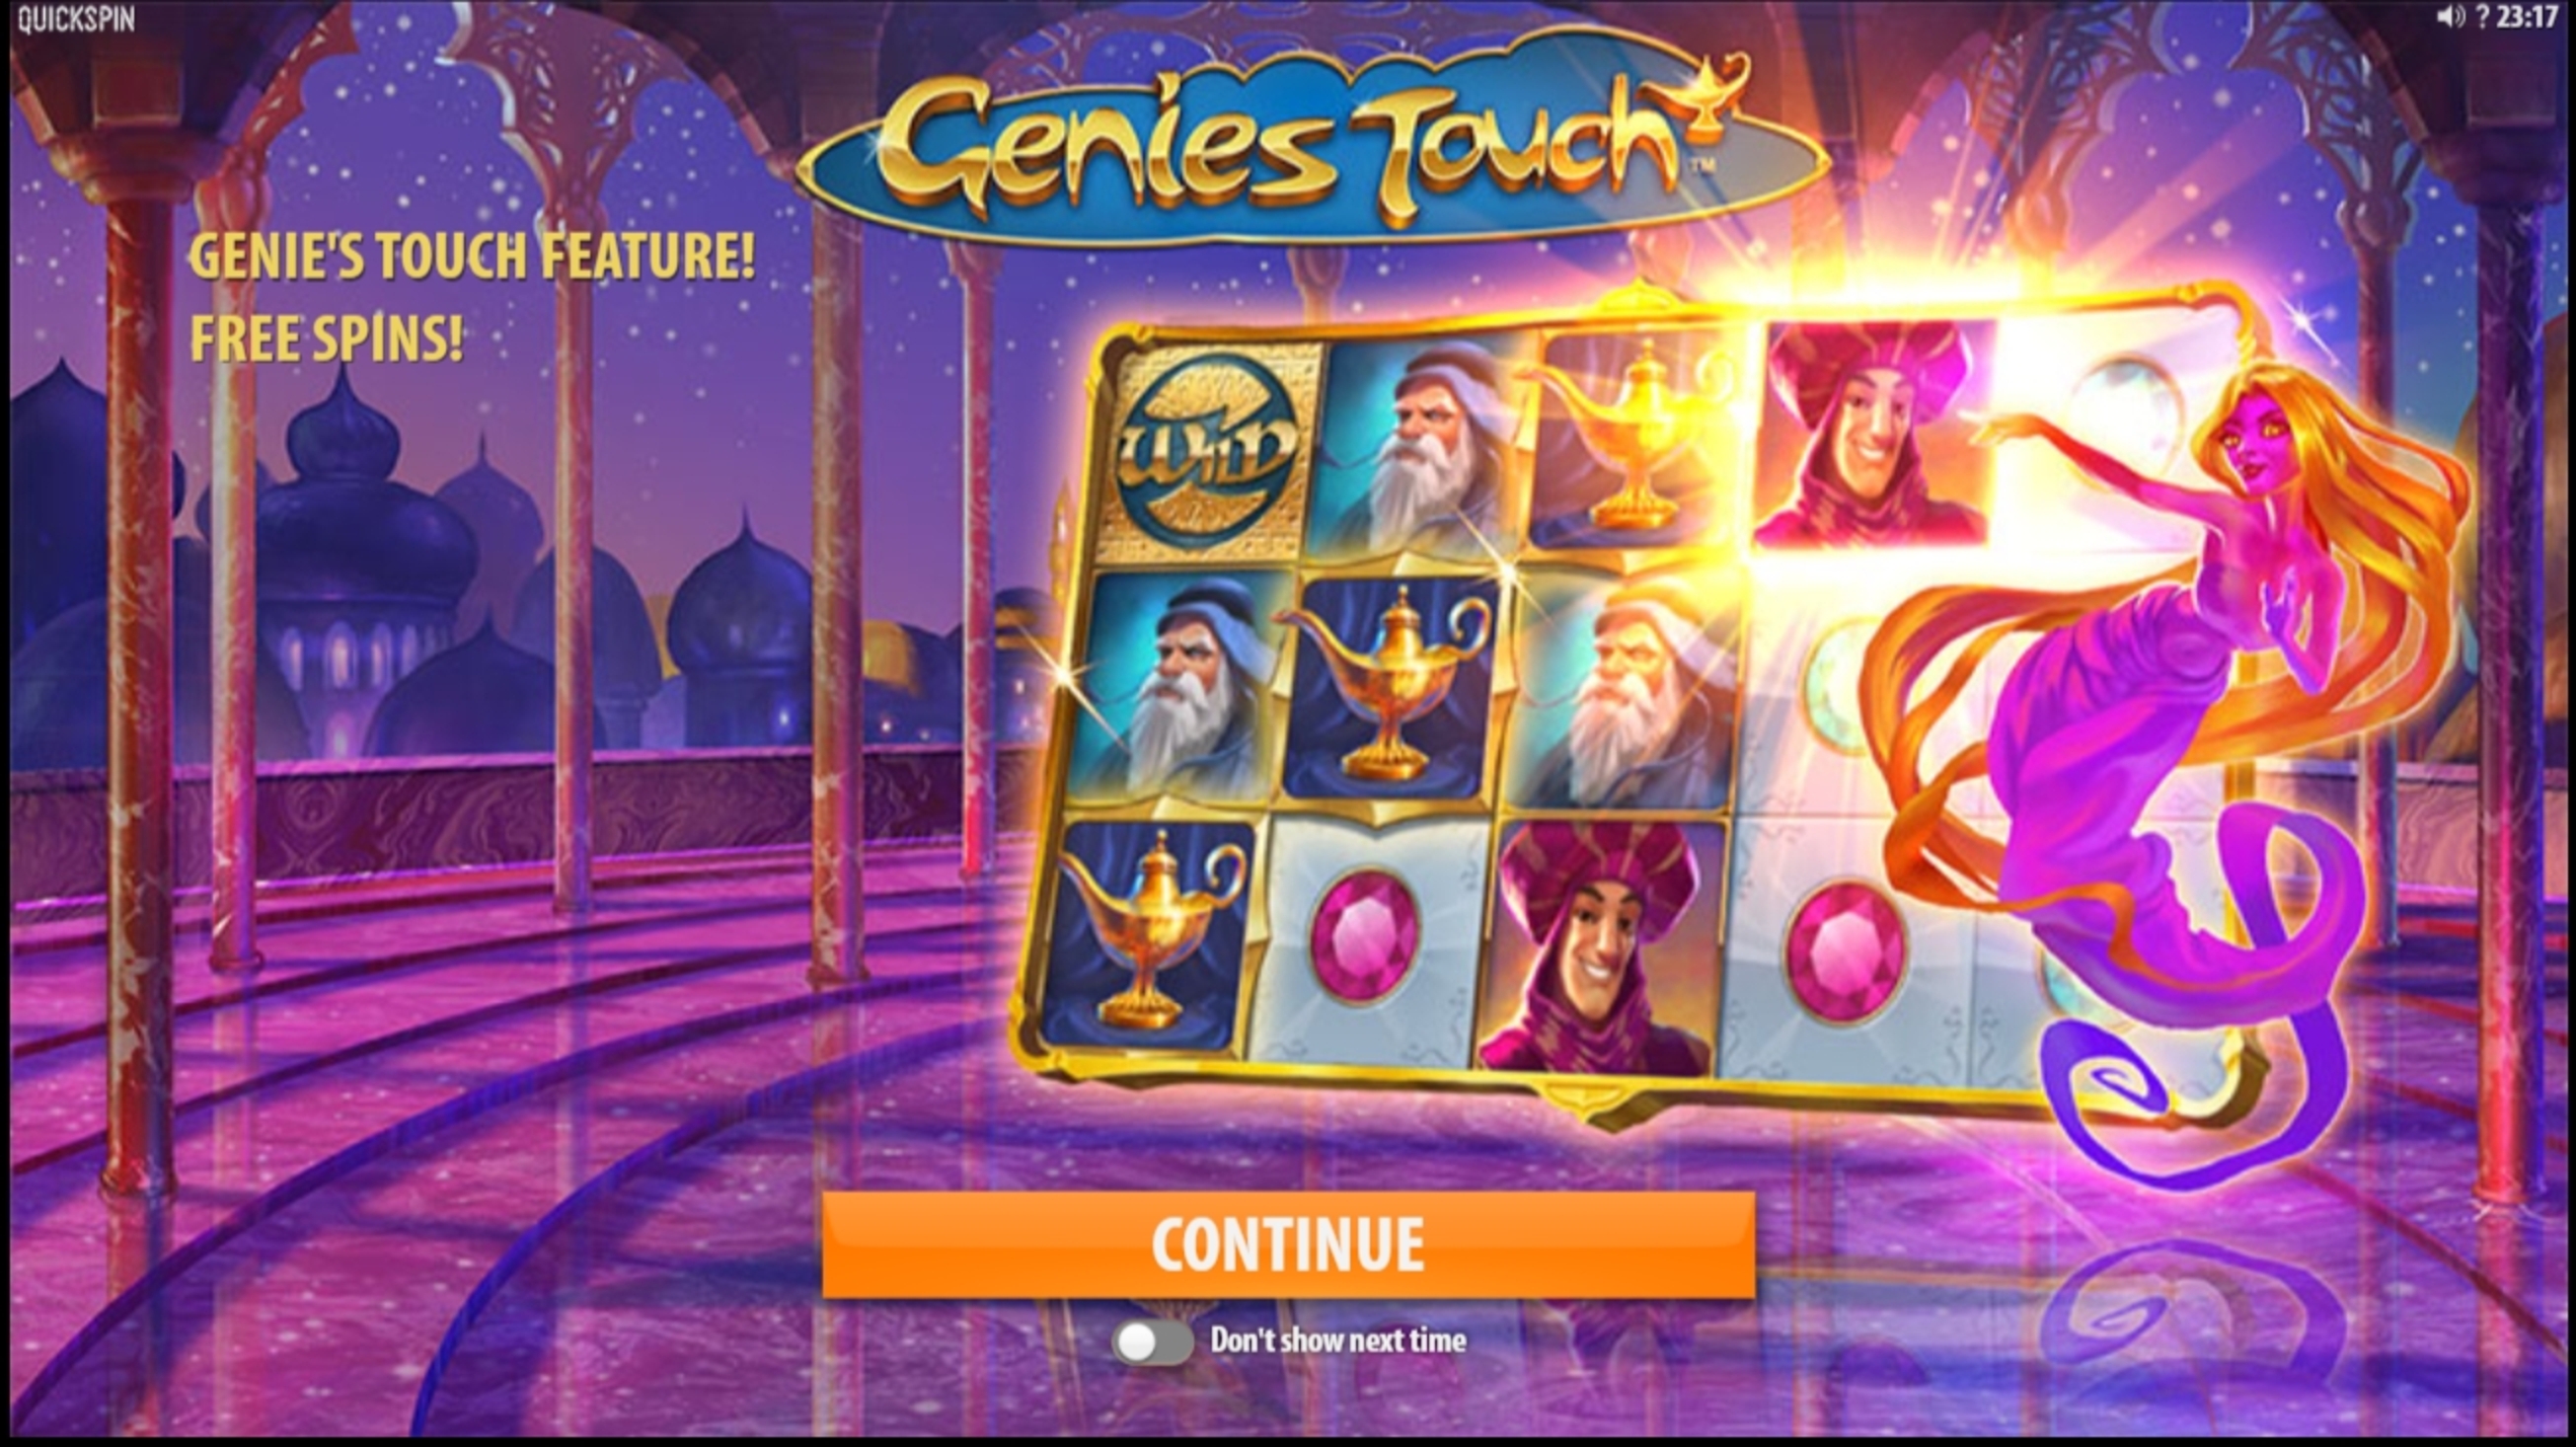 Play Genies Touch Free Casino Slot Game by Quickspin